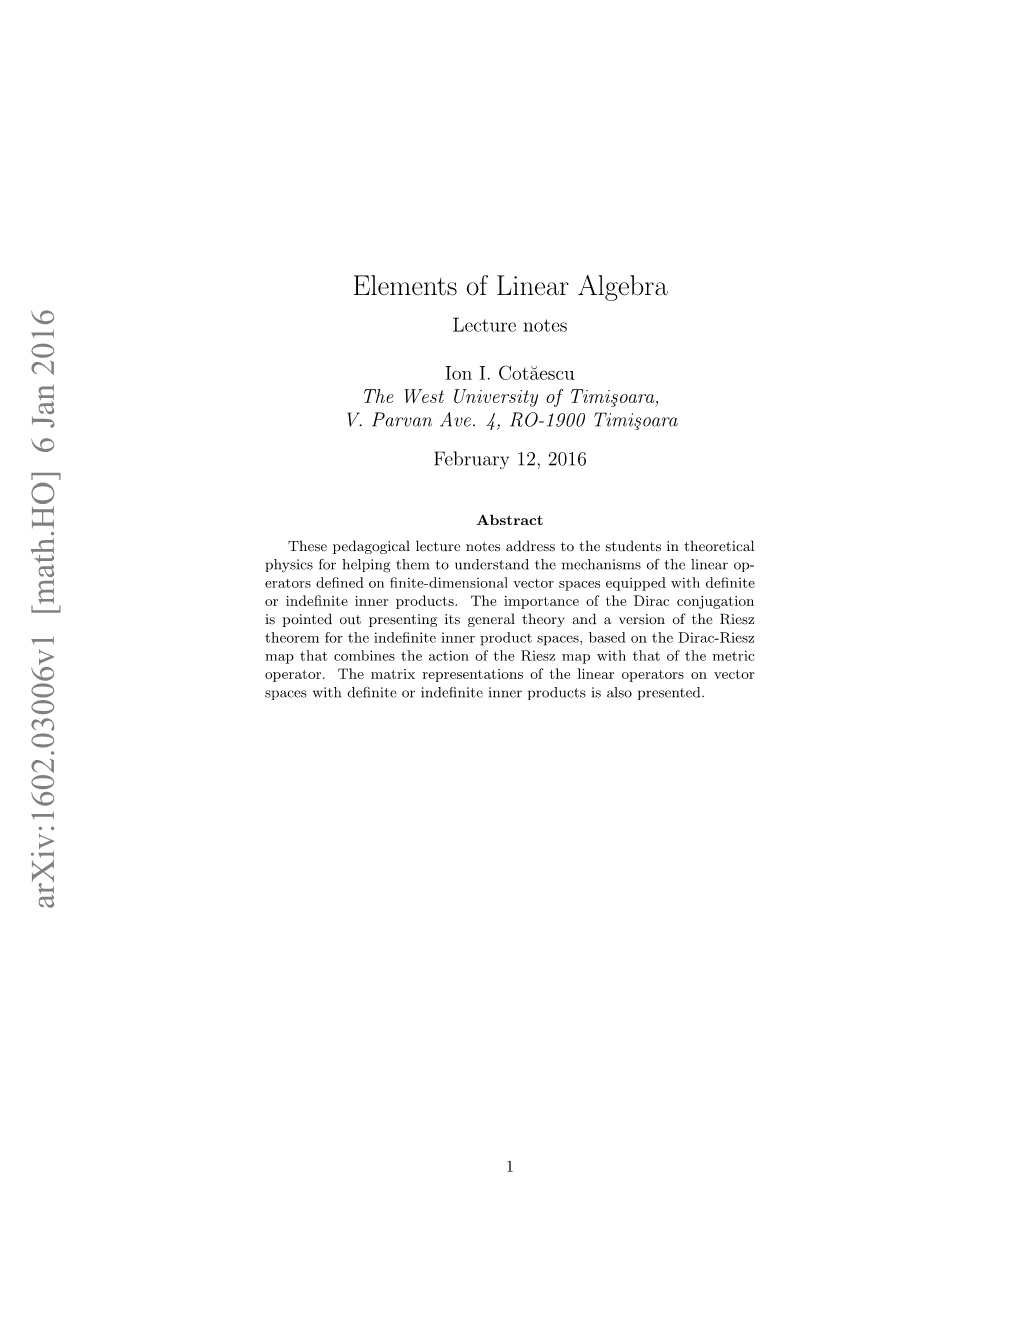 Elements of Linear Algebra. Lecture Notes